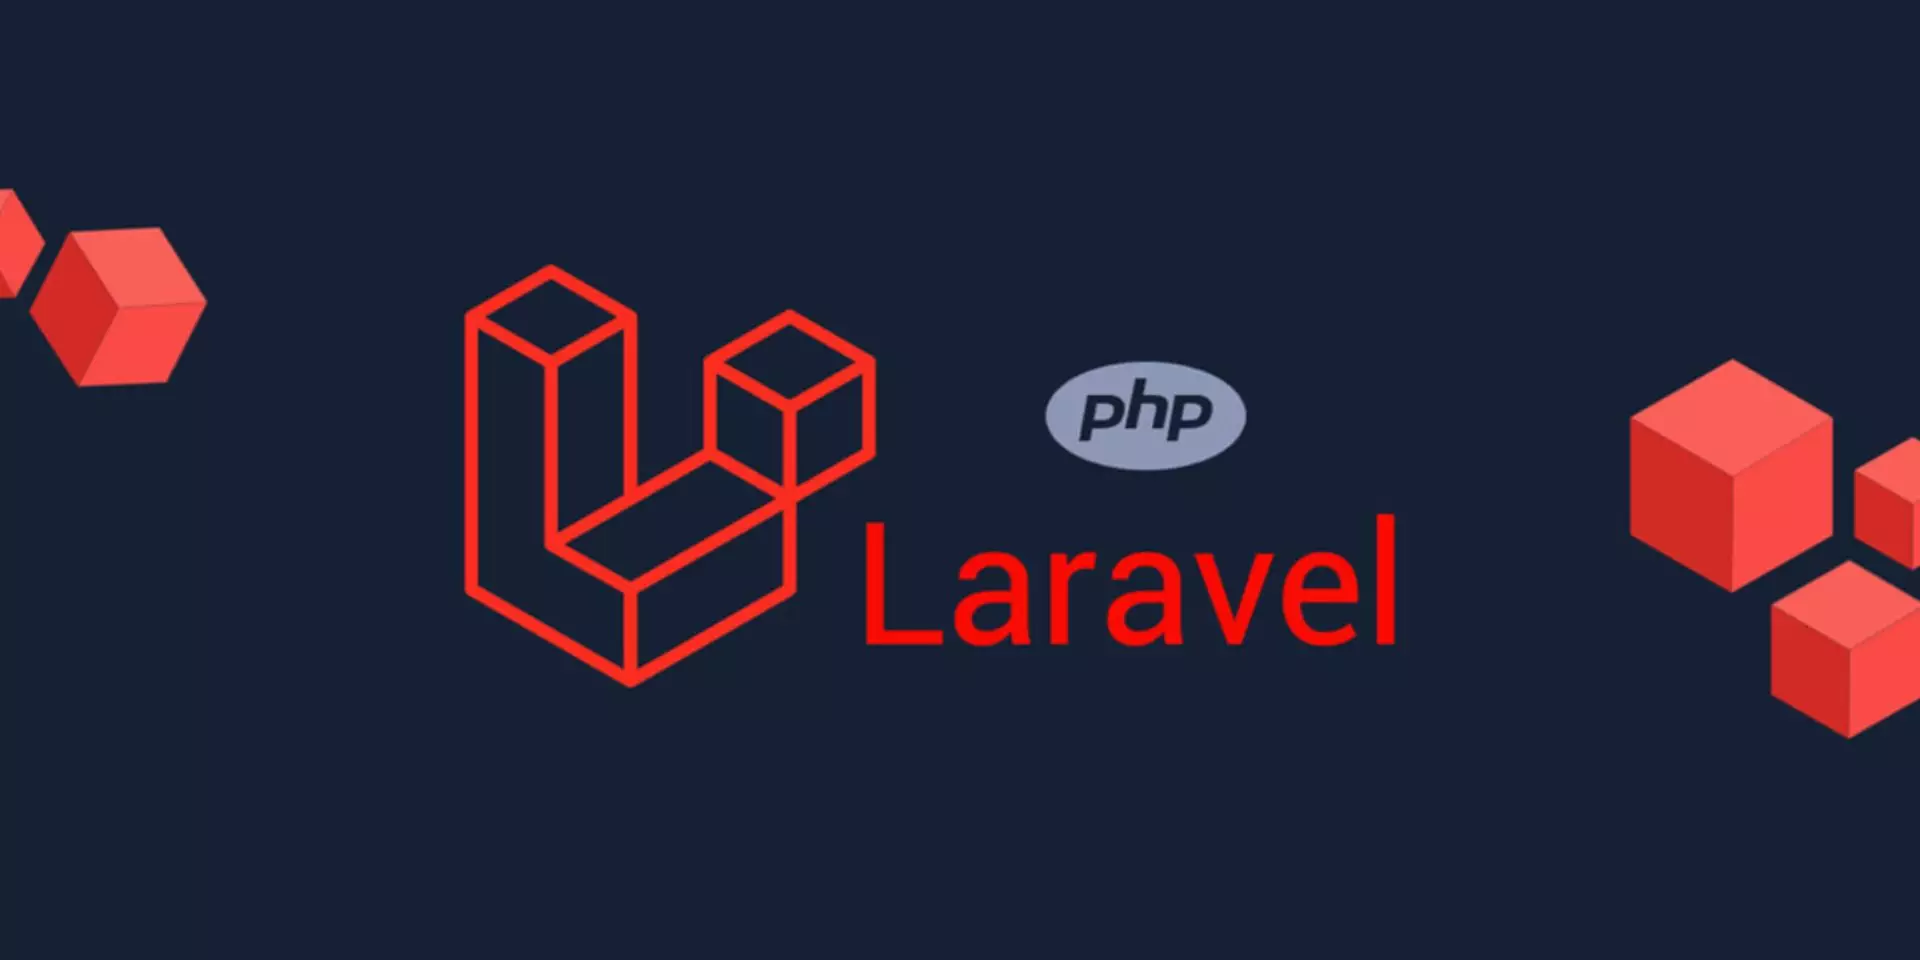 Why Laravel is the Best PHP Framework in 2021?